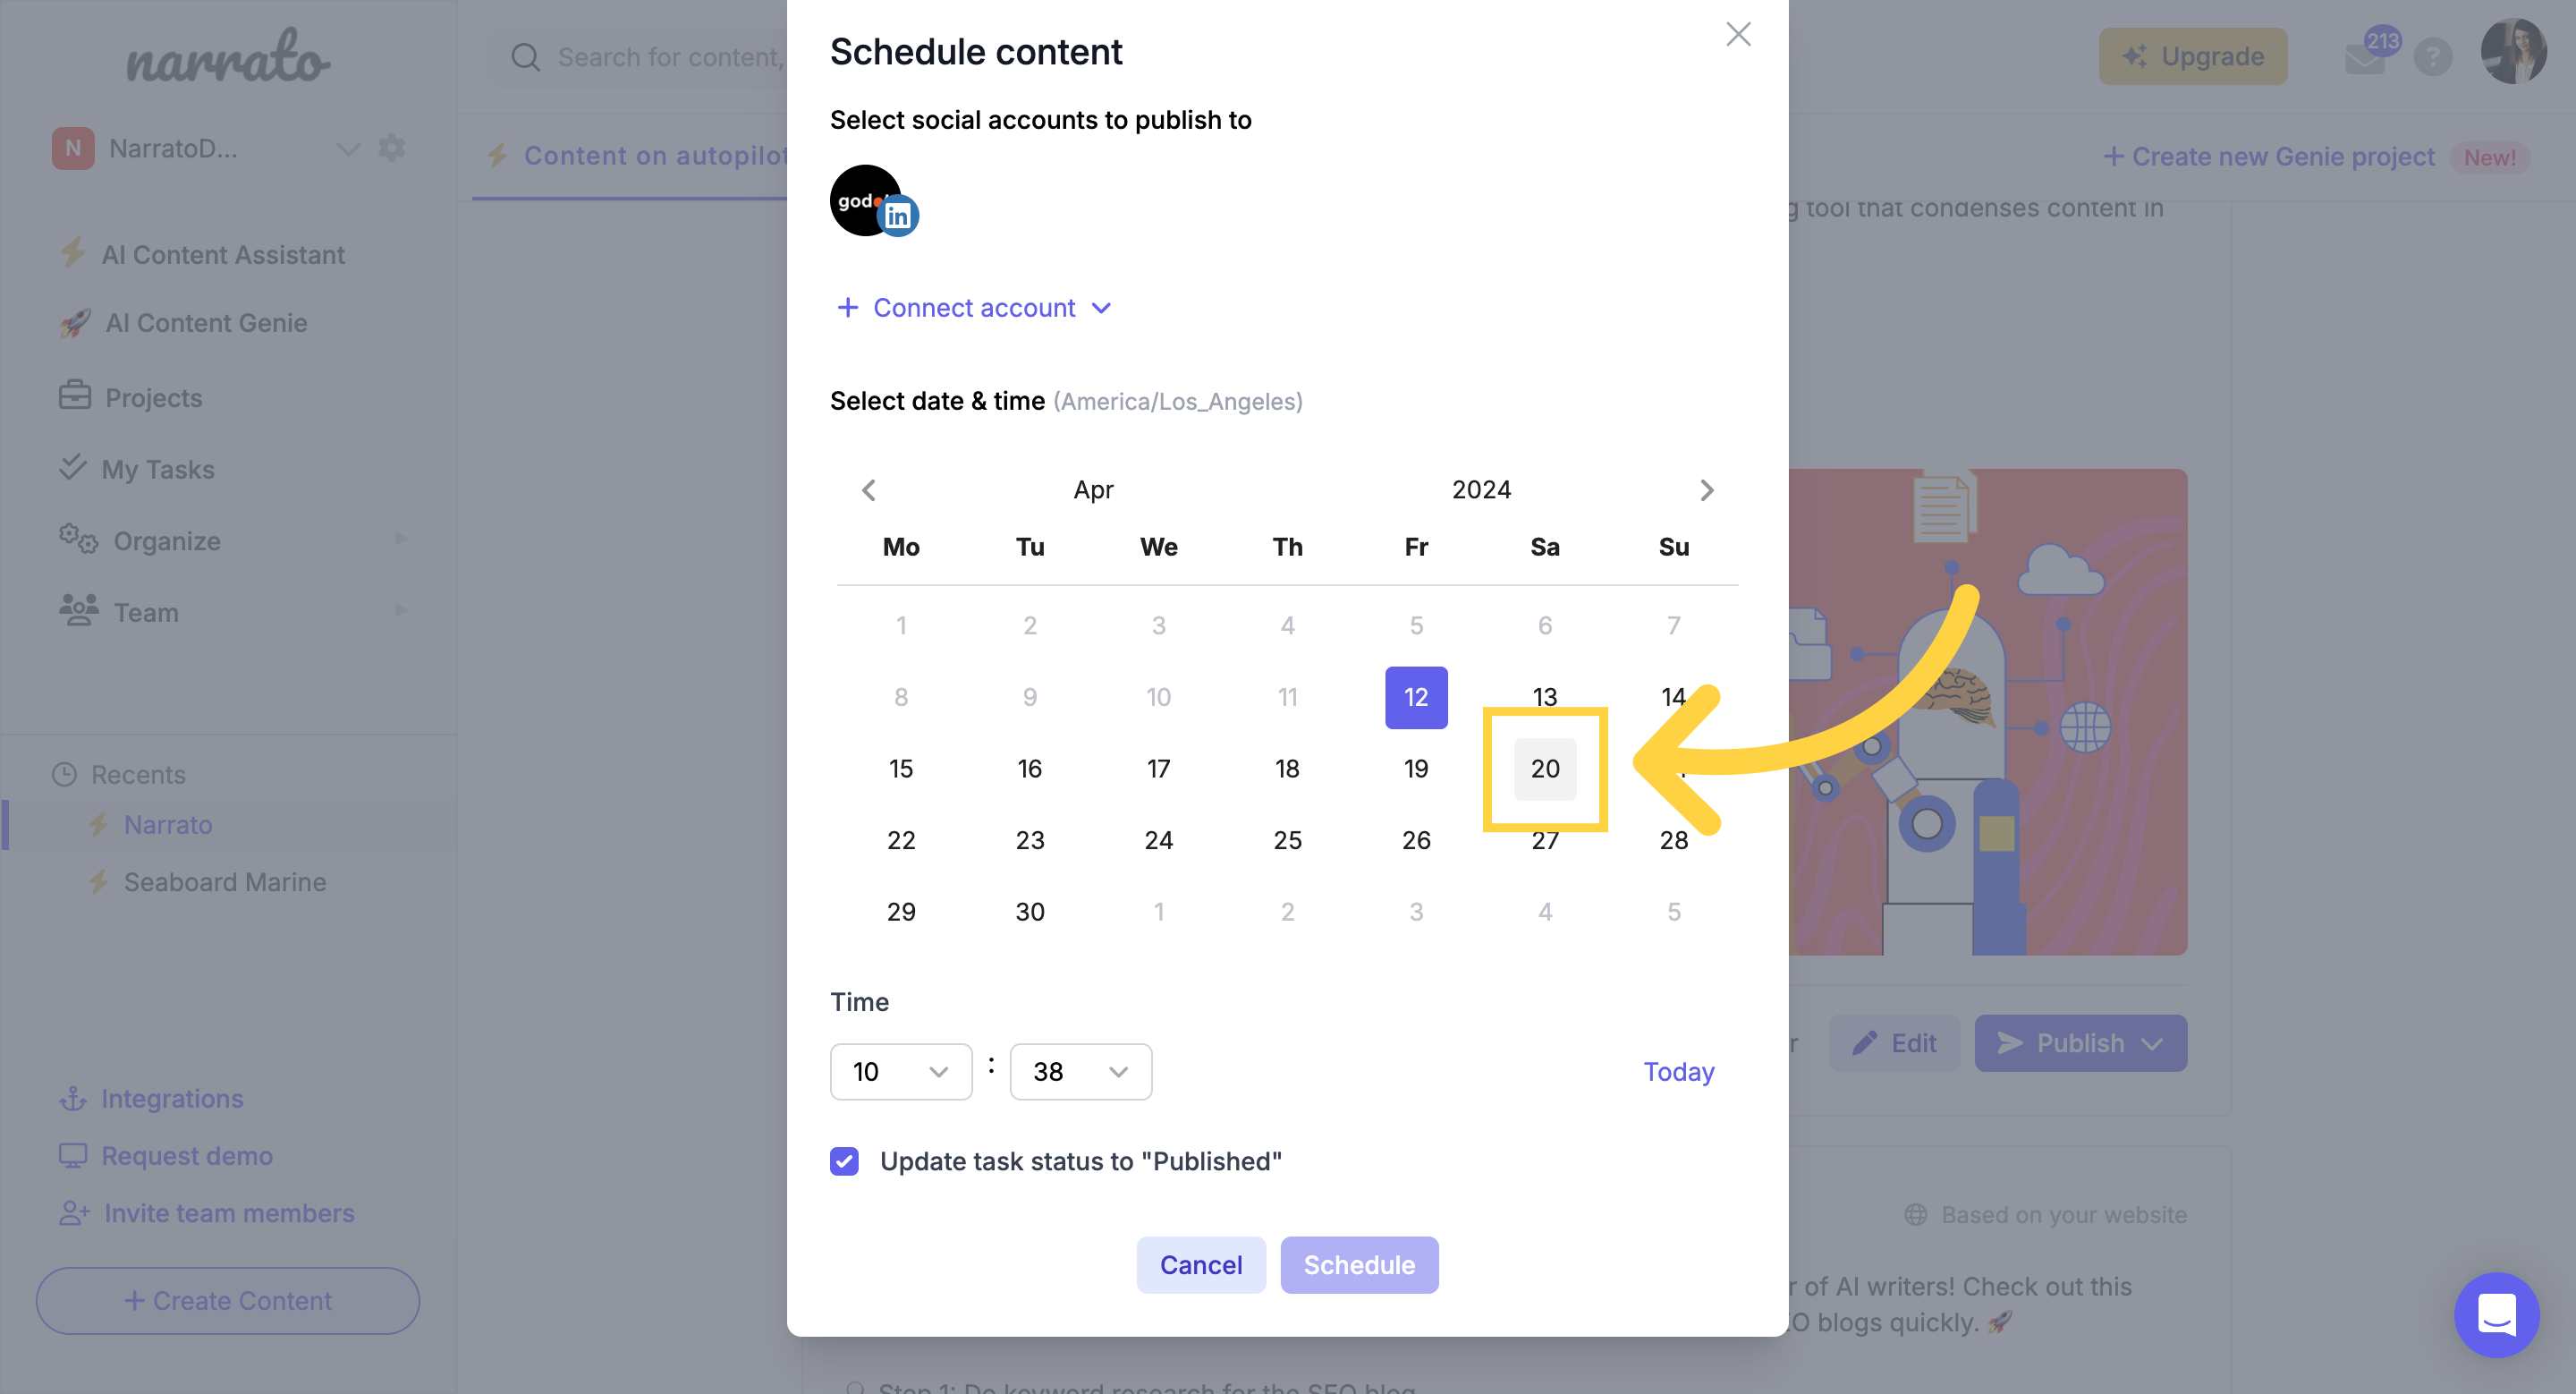 Scheduling social media posts from the AI Content Genie